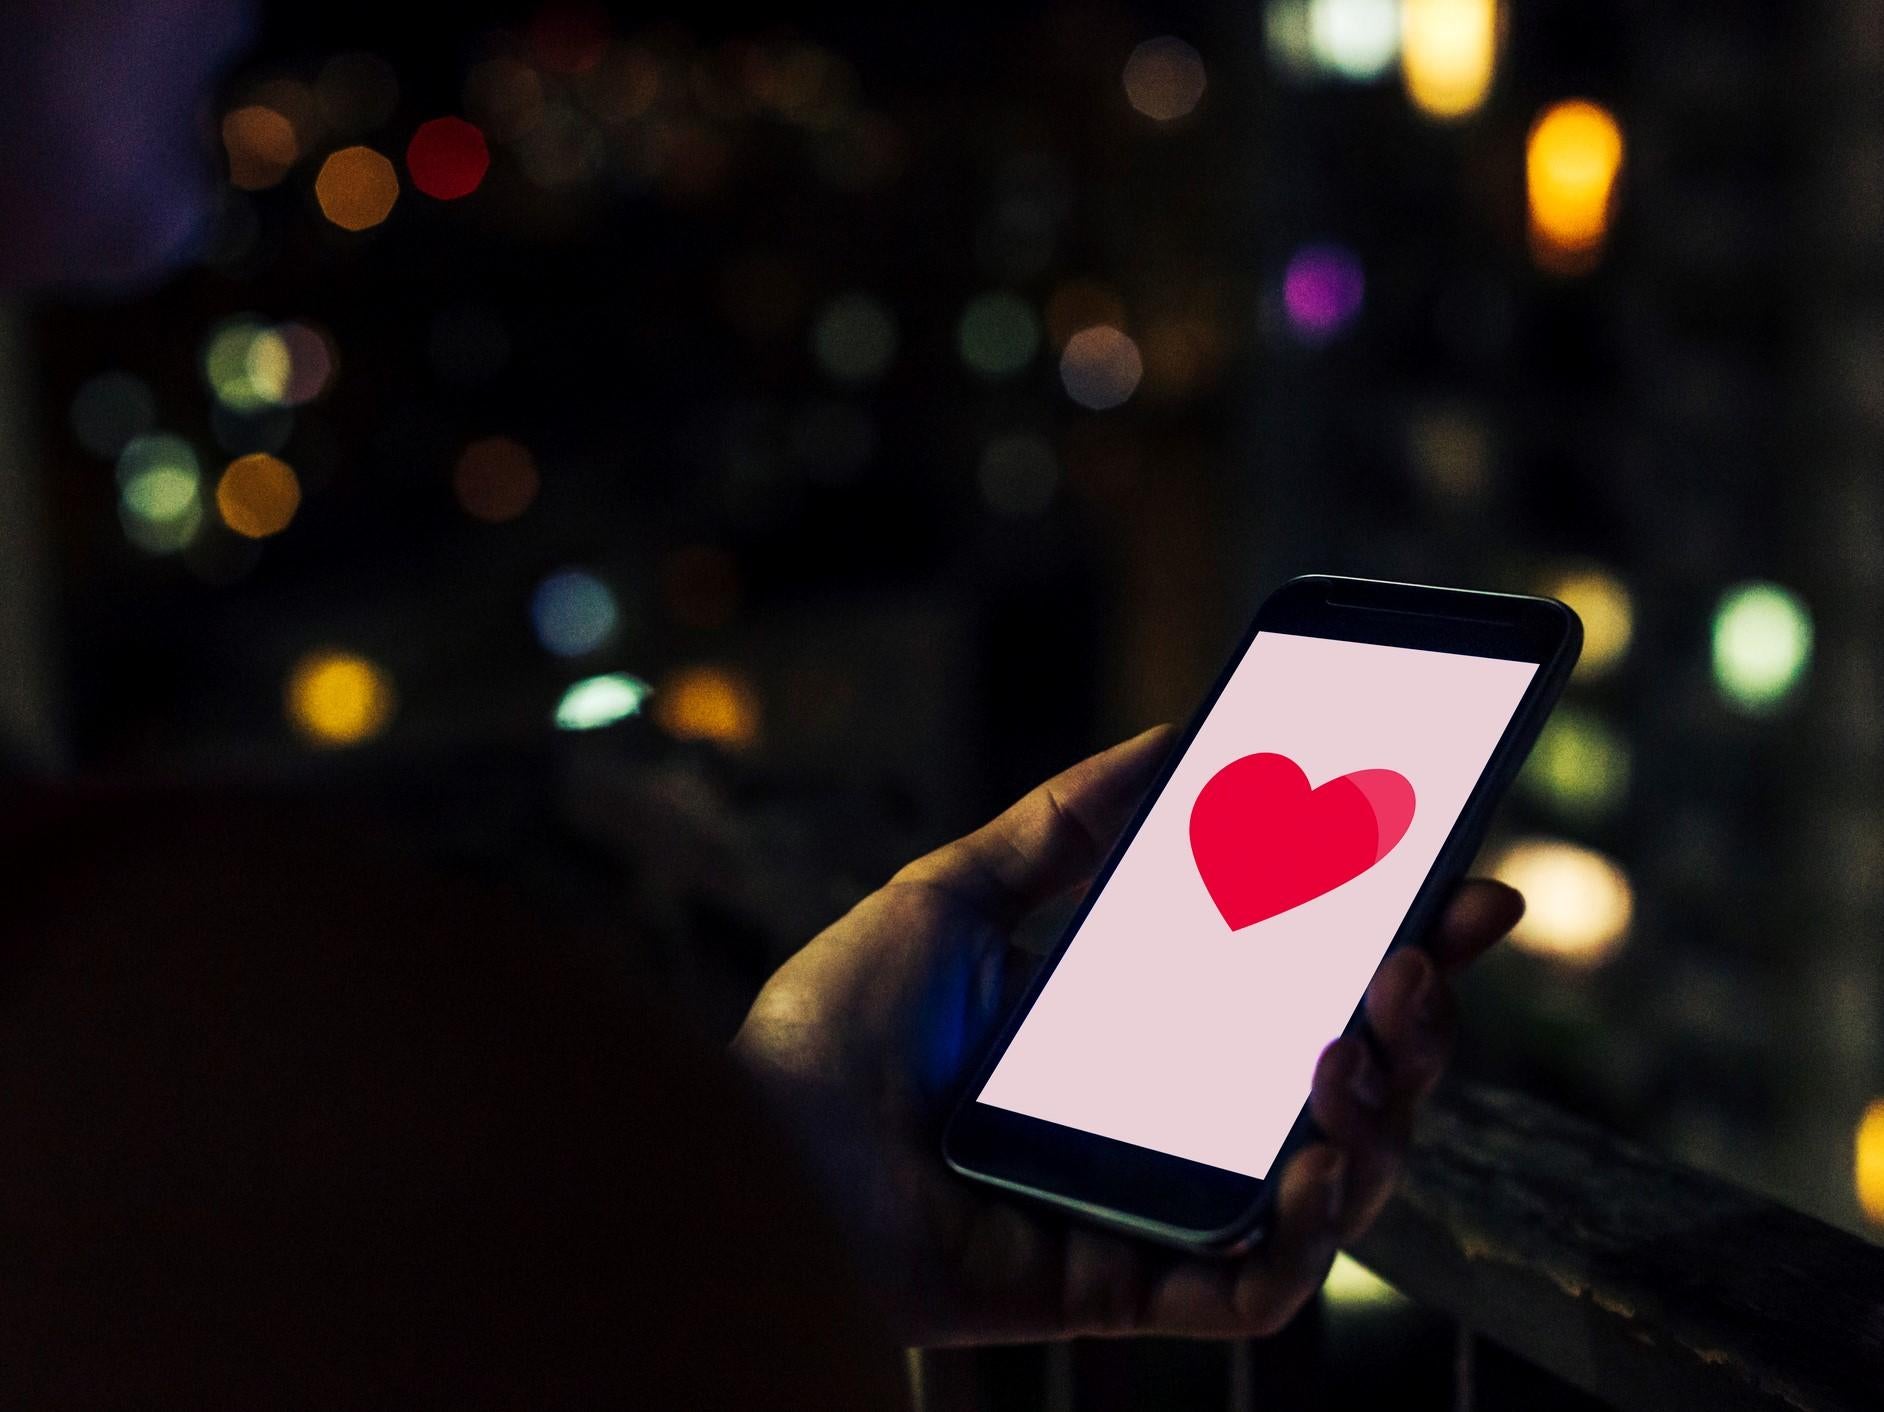 Facebook Dating will connect users with their secret admirers